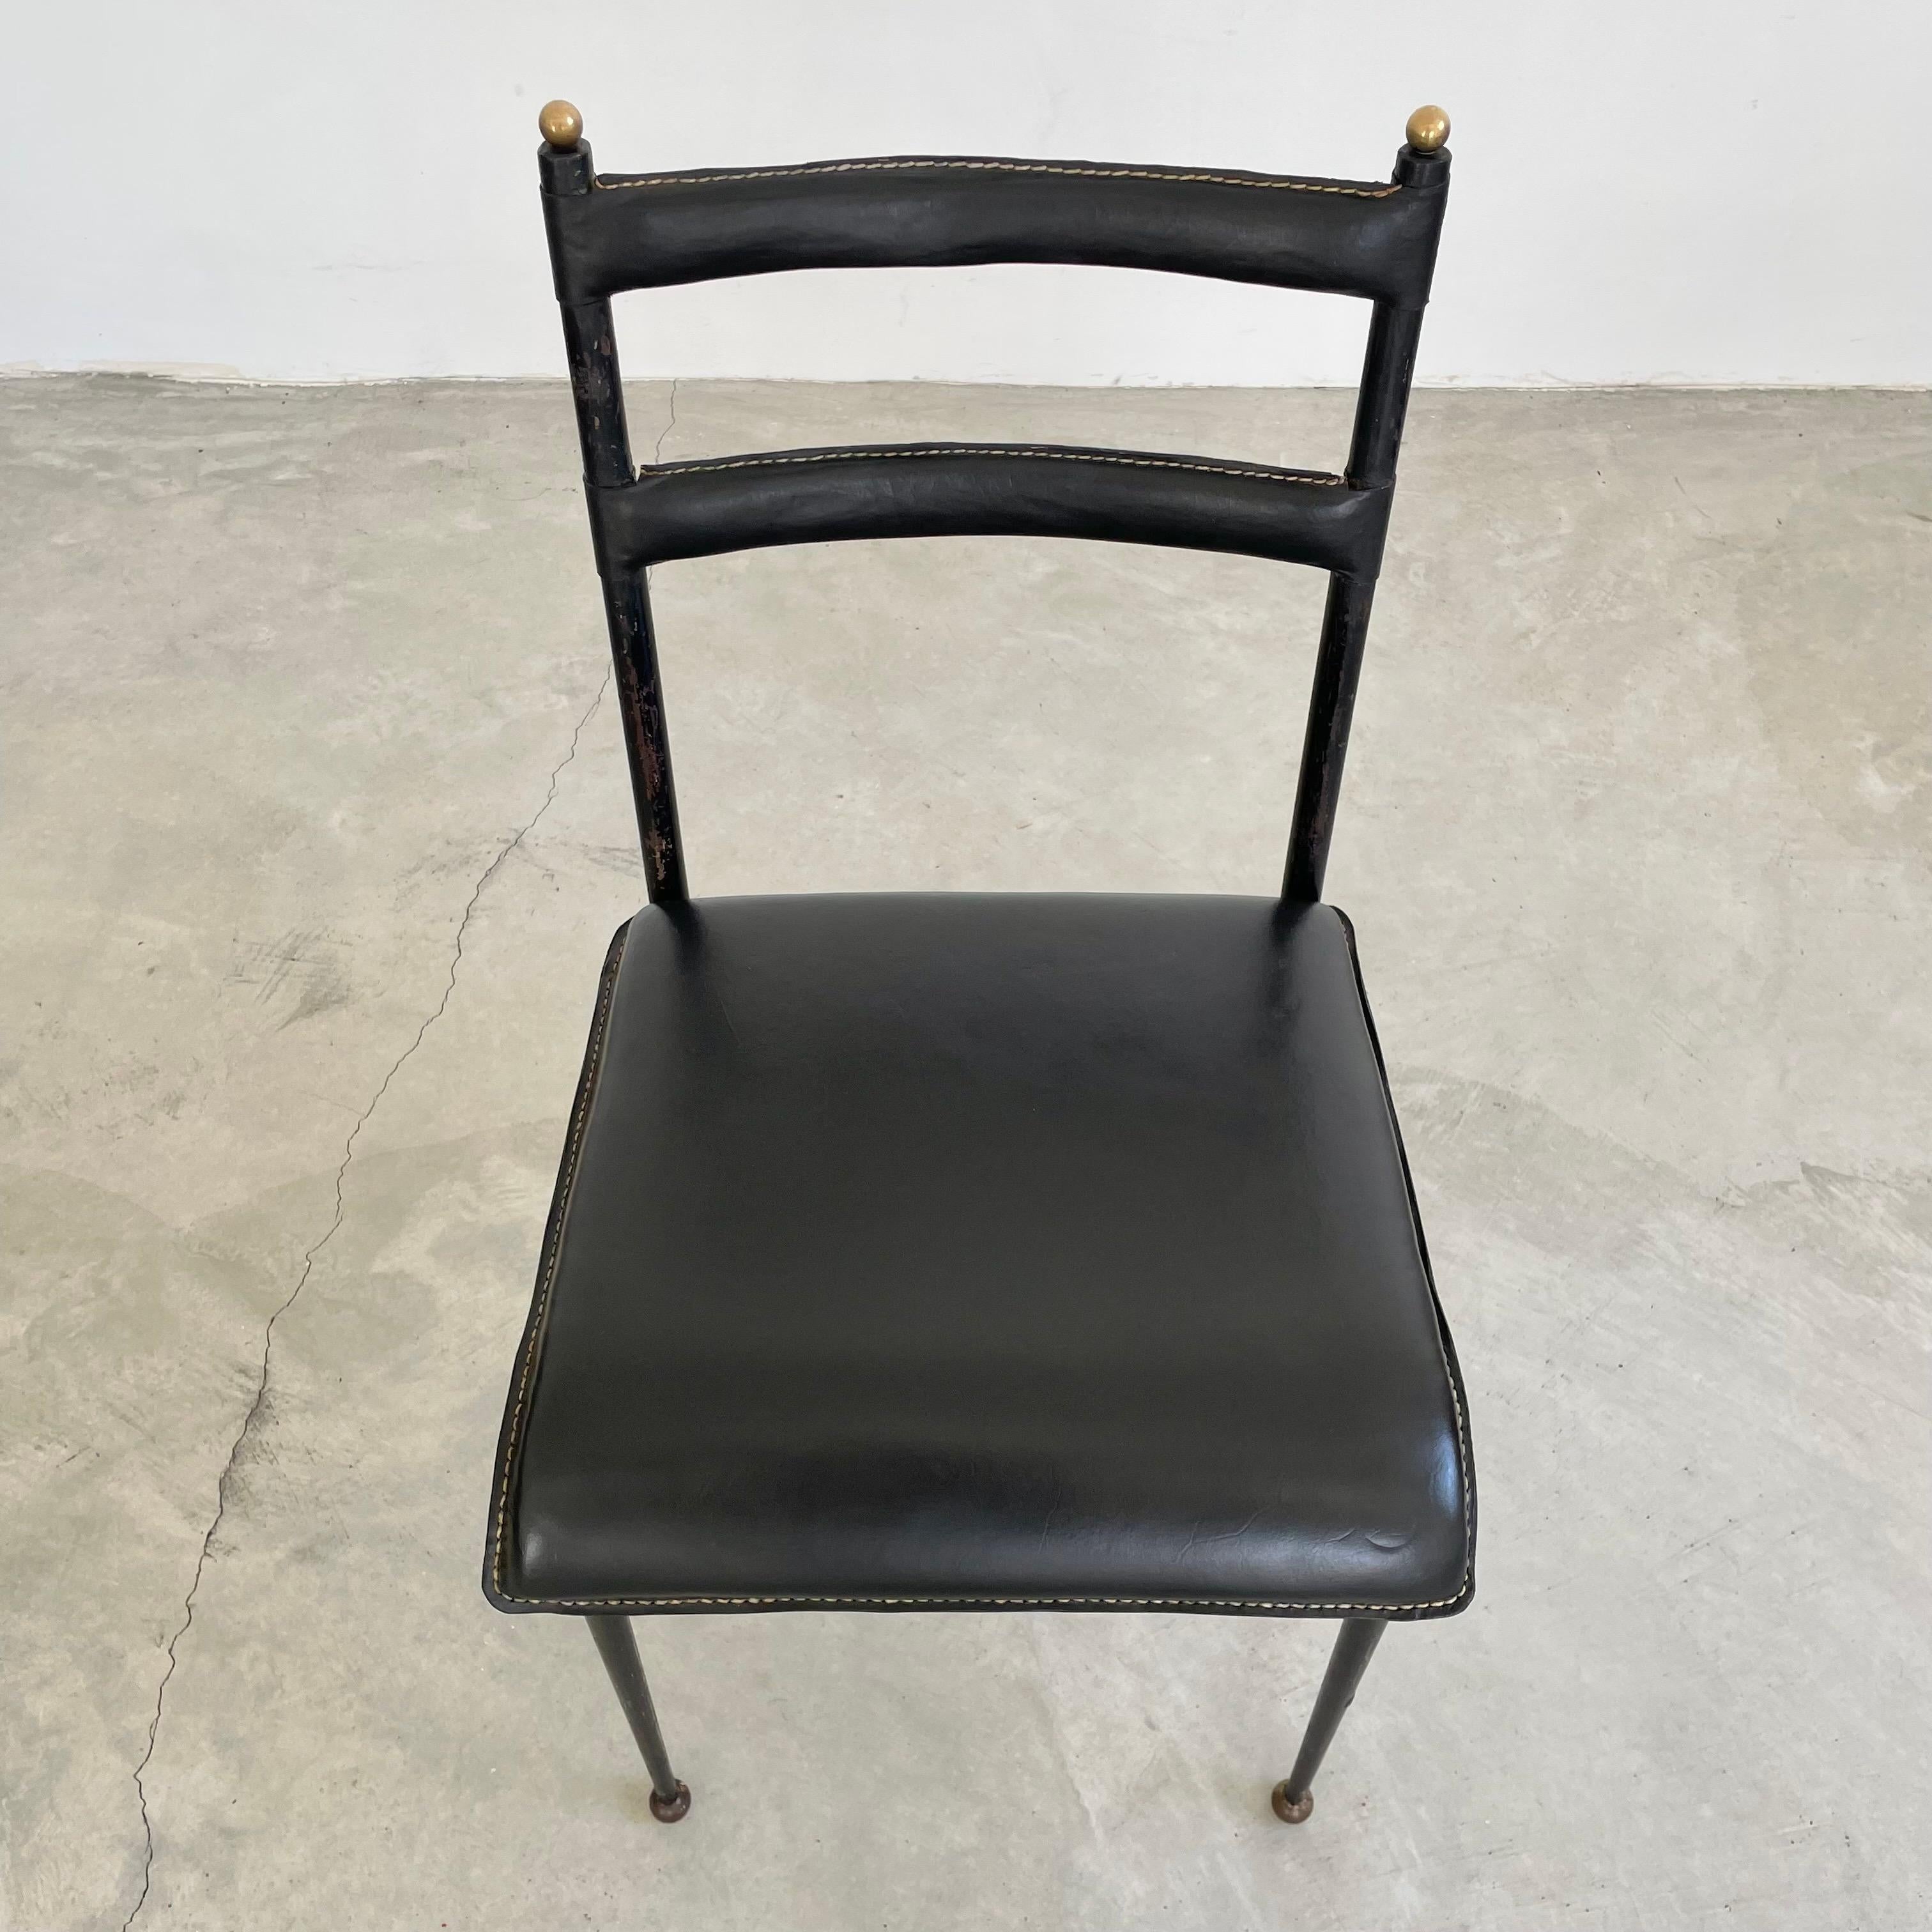 Art Deco Jacques Adnet Leather Chair, 1950s France